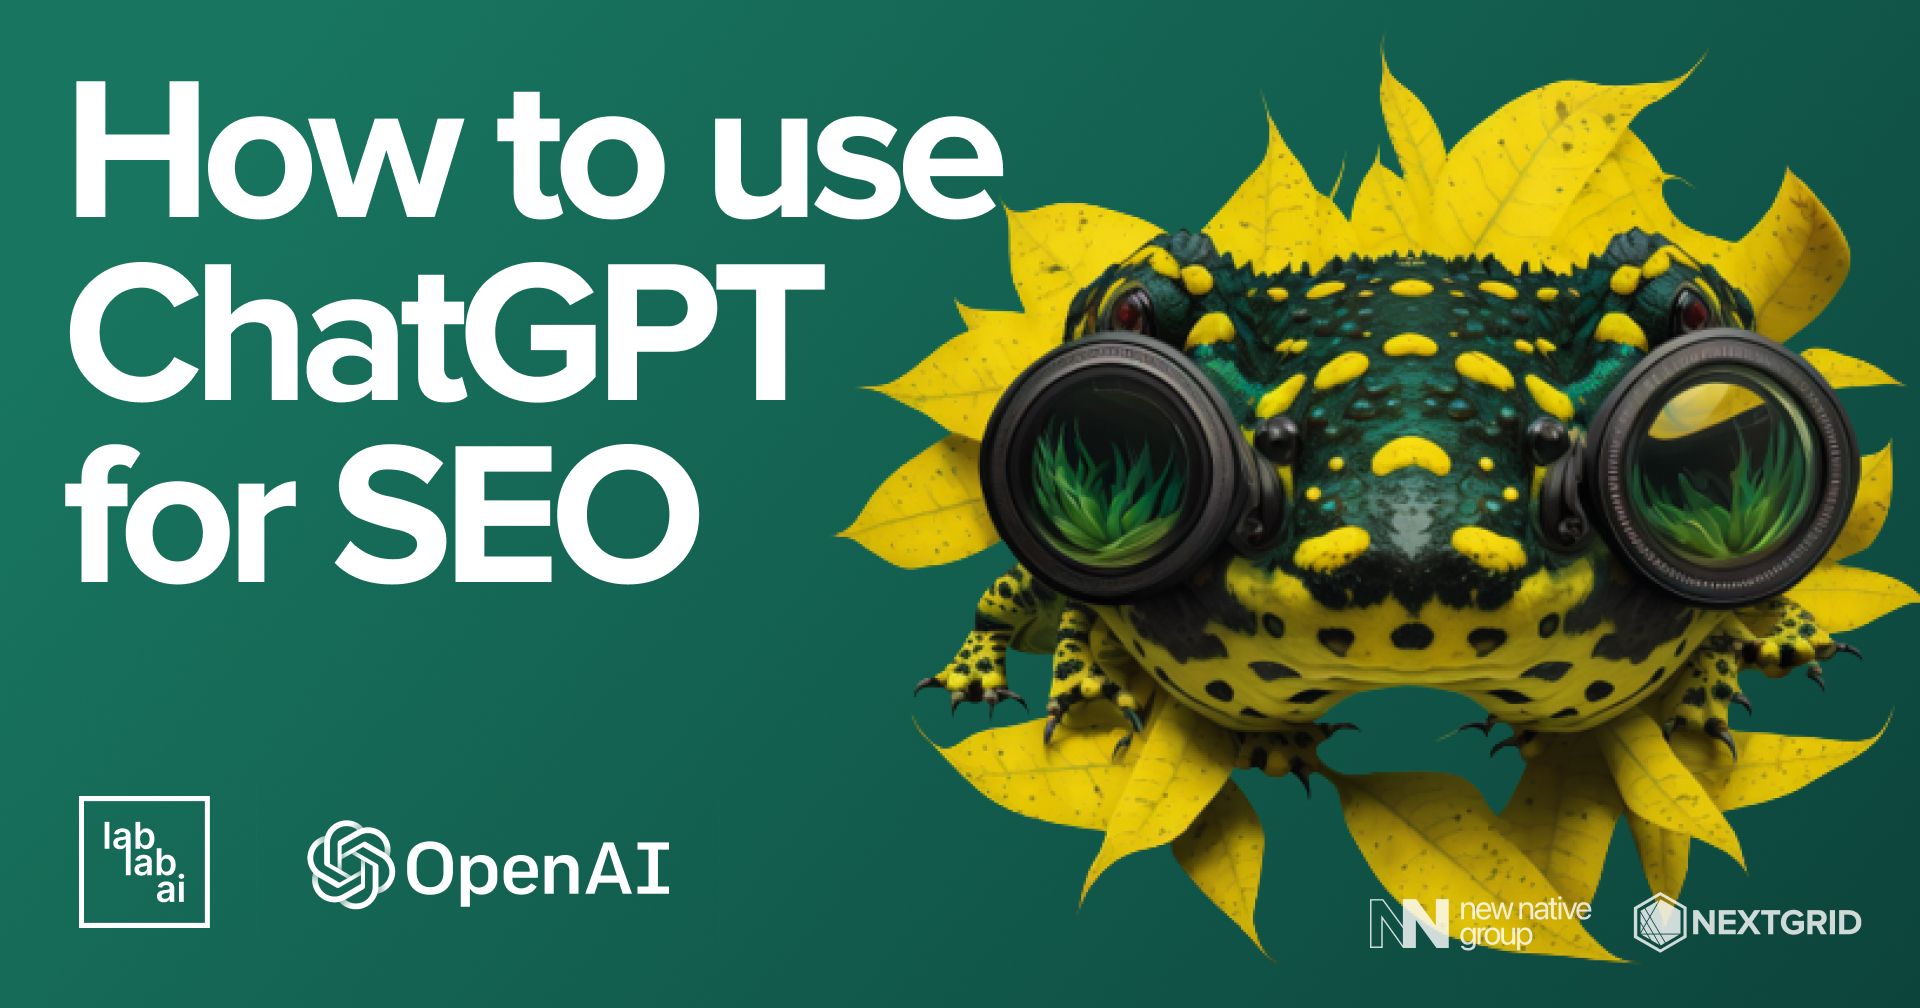 ChatGPT tutorial: How to use ChatGPT for SEO